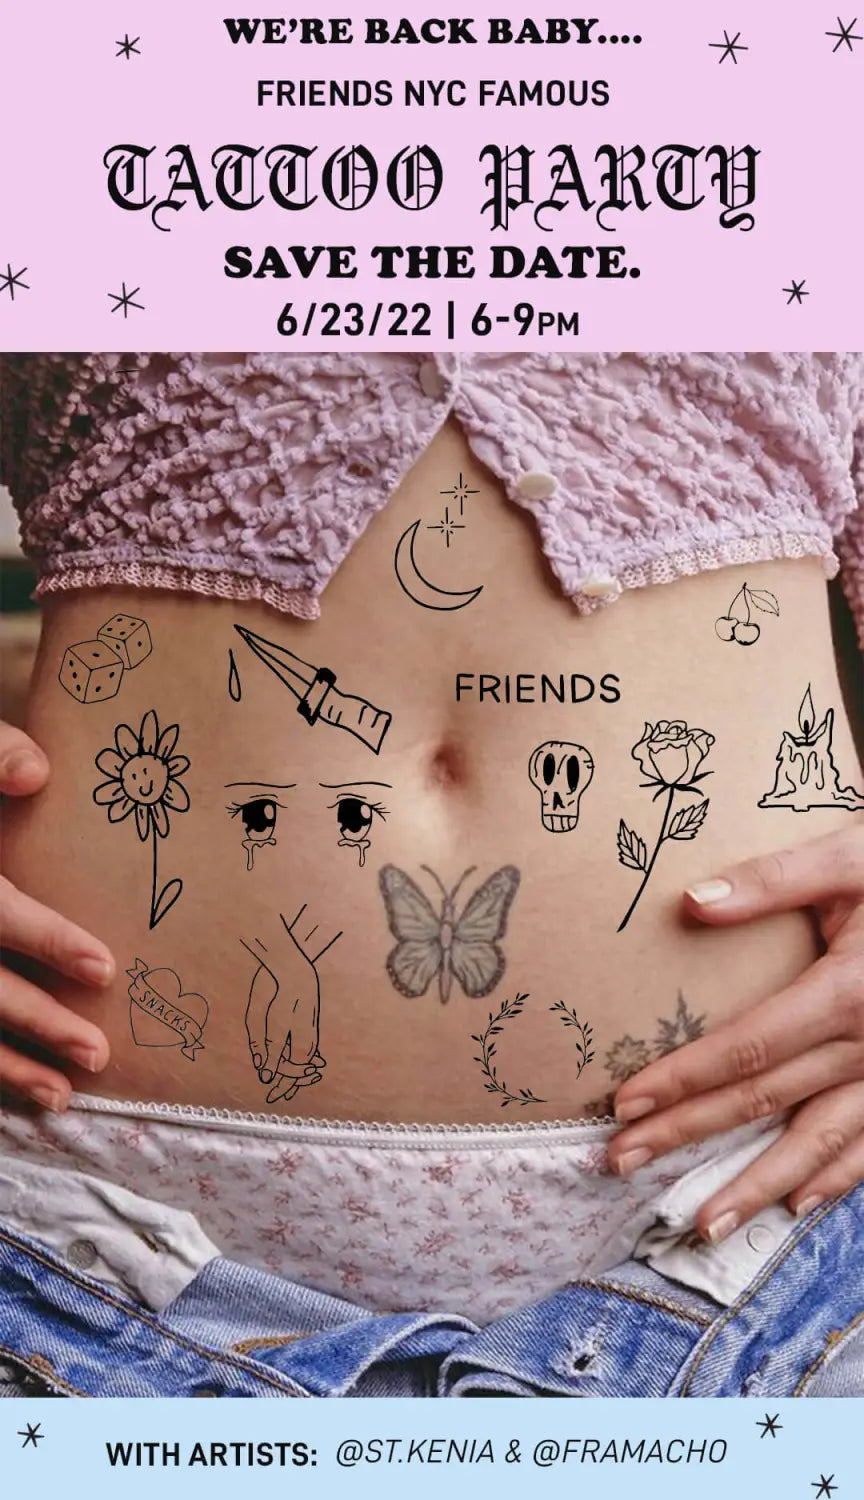 Friends NYC ICONIC Tattoo Party is Back! Meet St. Kenia & FRAMACHO, Your Tattoo Artists Here!